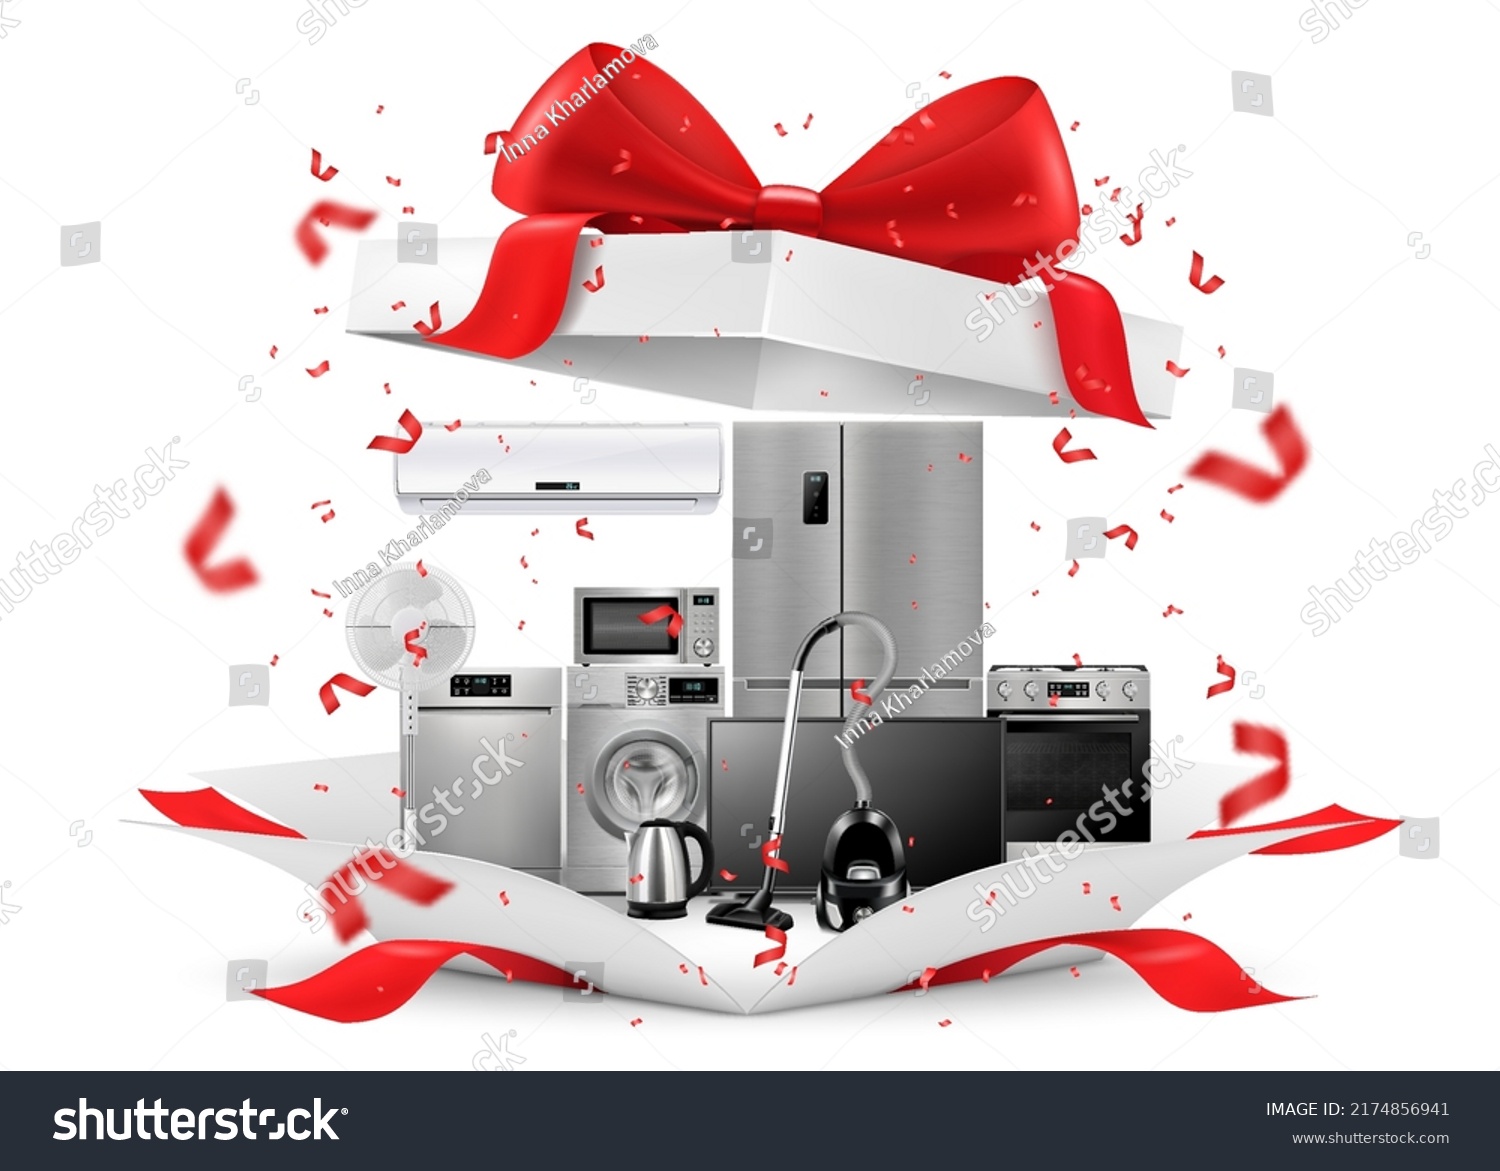 SVG of Gift concept, home appliances inside gift box. Refrigerator, microwave, food processor, TV, washing machine, gas stove, isolated on white background. 3D rendering. Realistic vector illustration svg